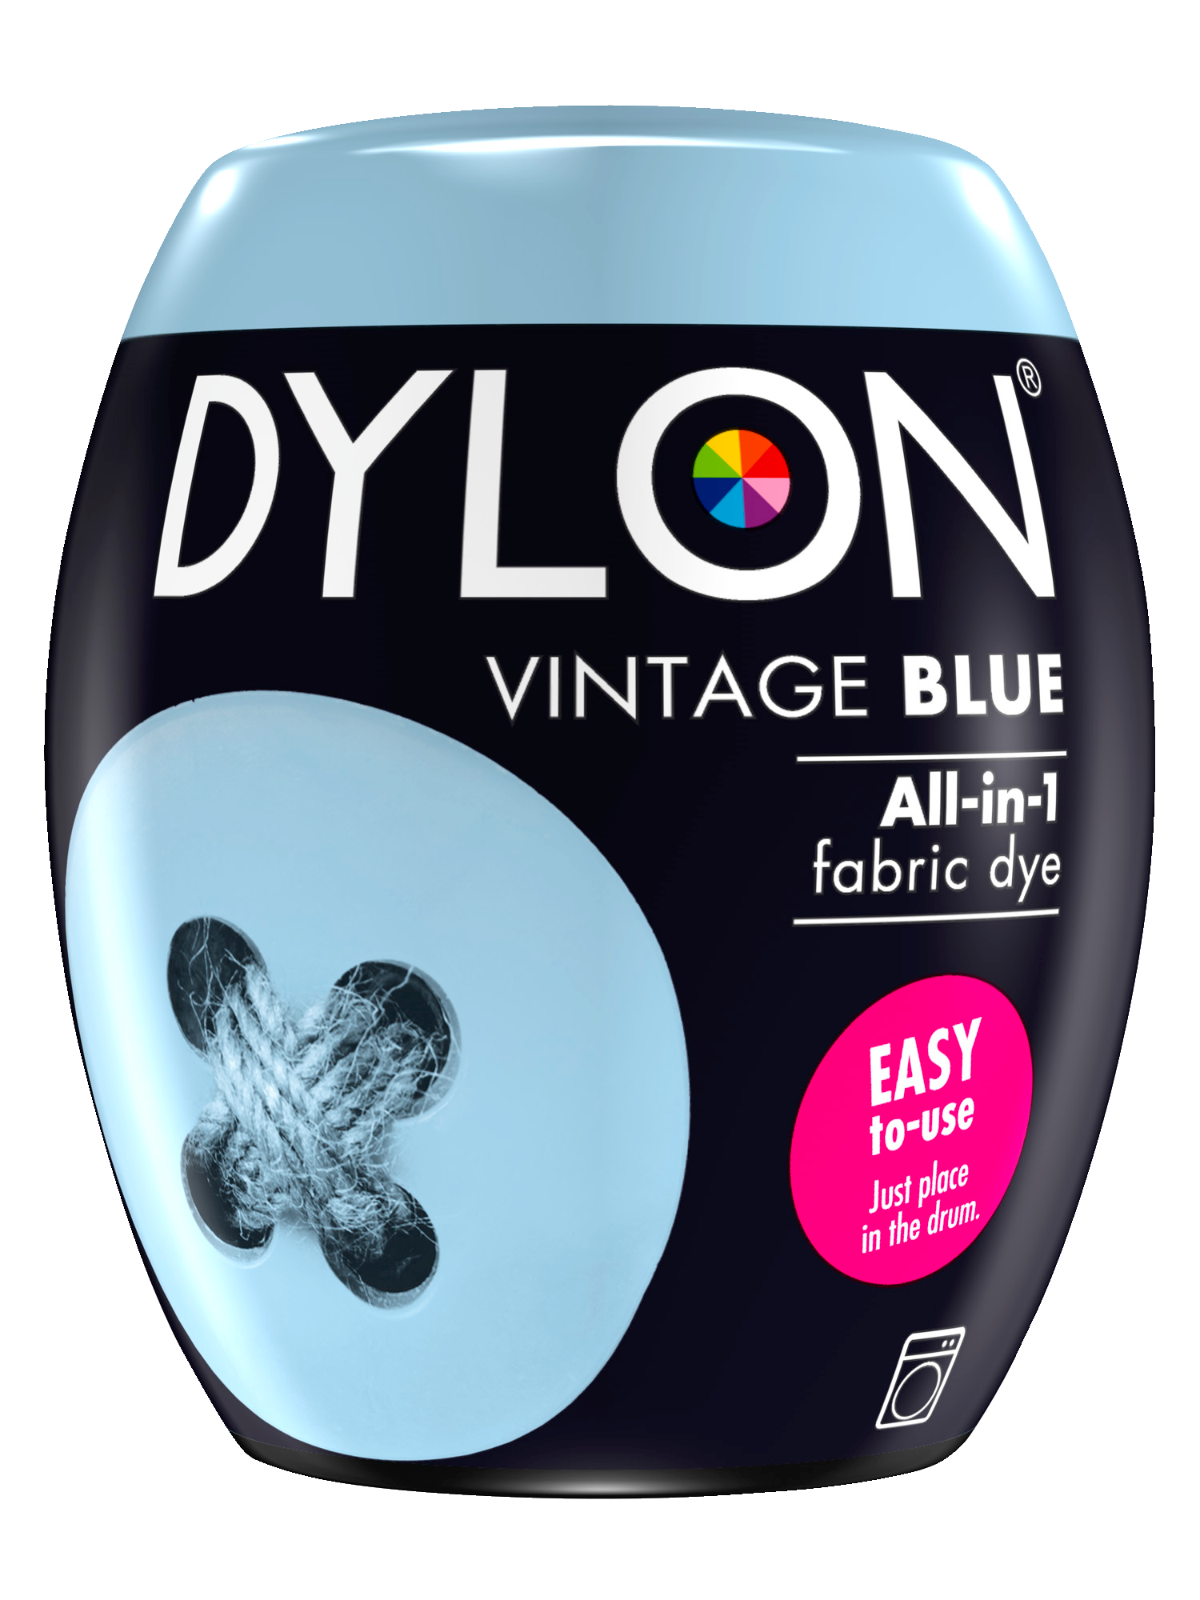 Vintage Blue Dylon Dye from Pearls in Acton London